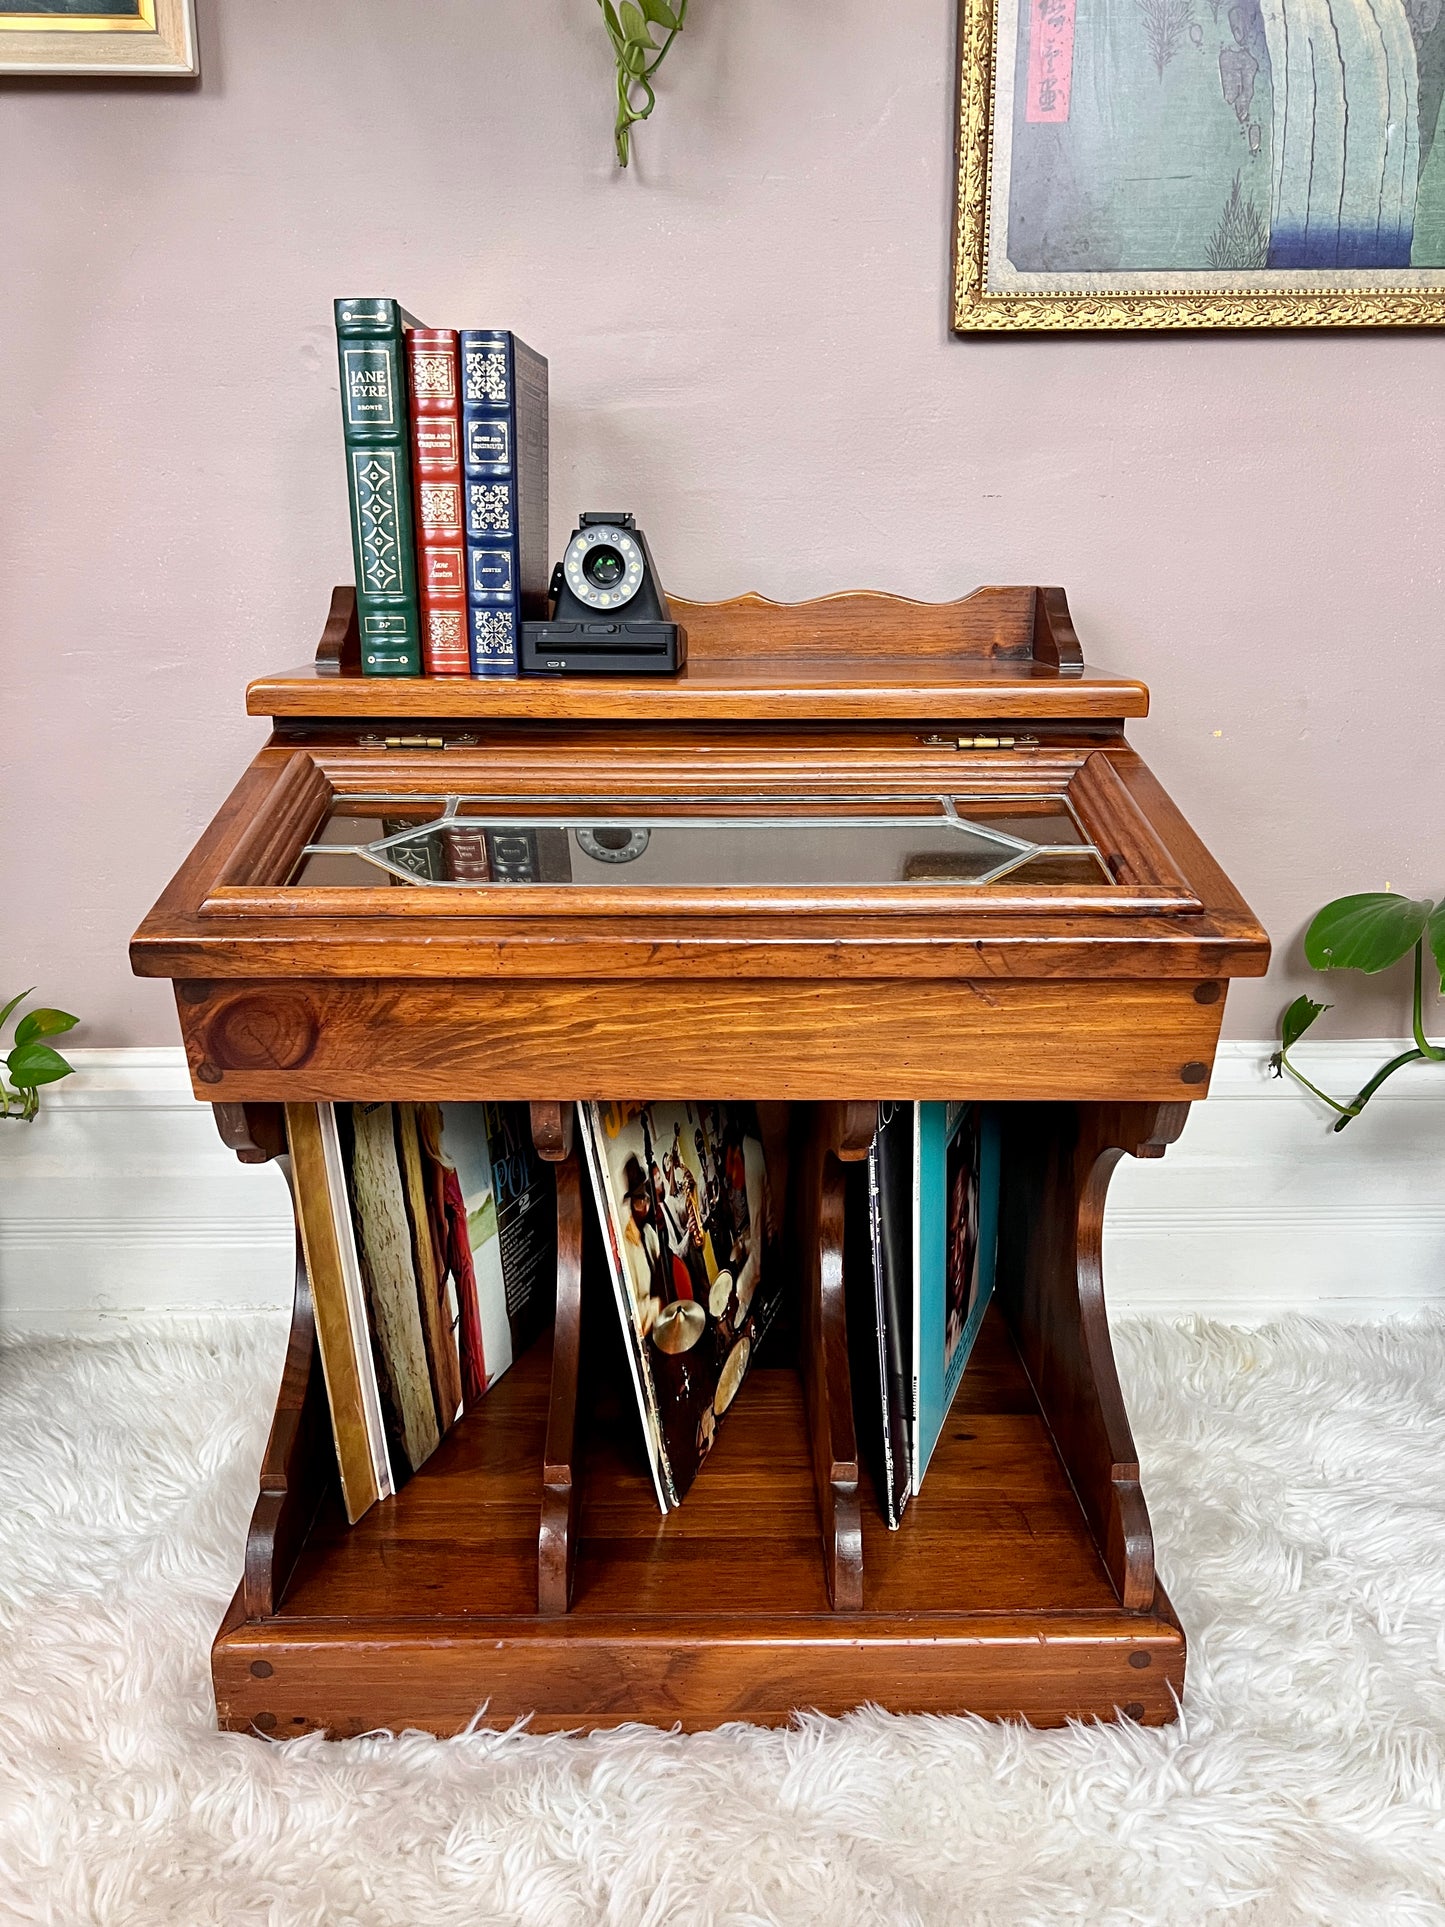 The Opine Record Cabinet